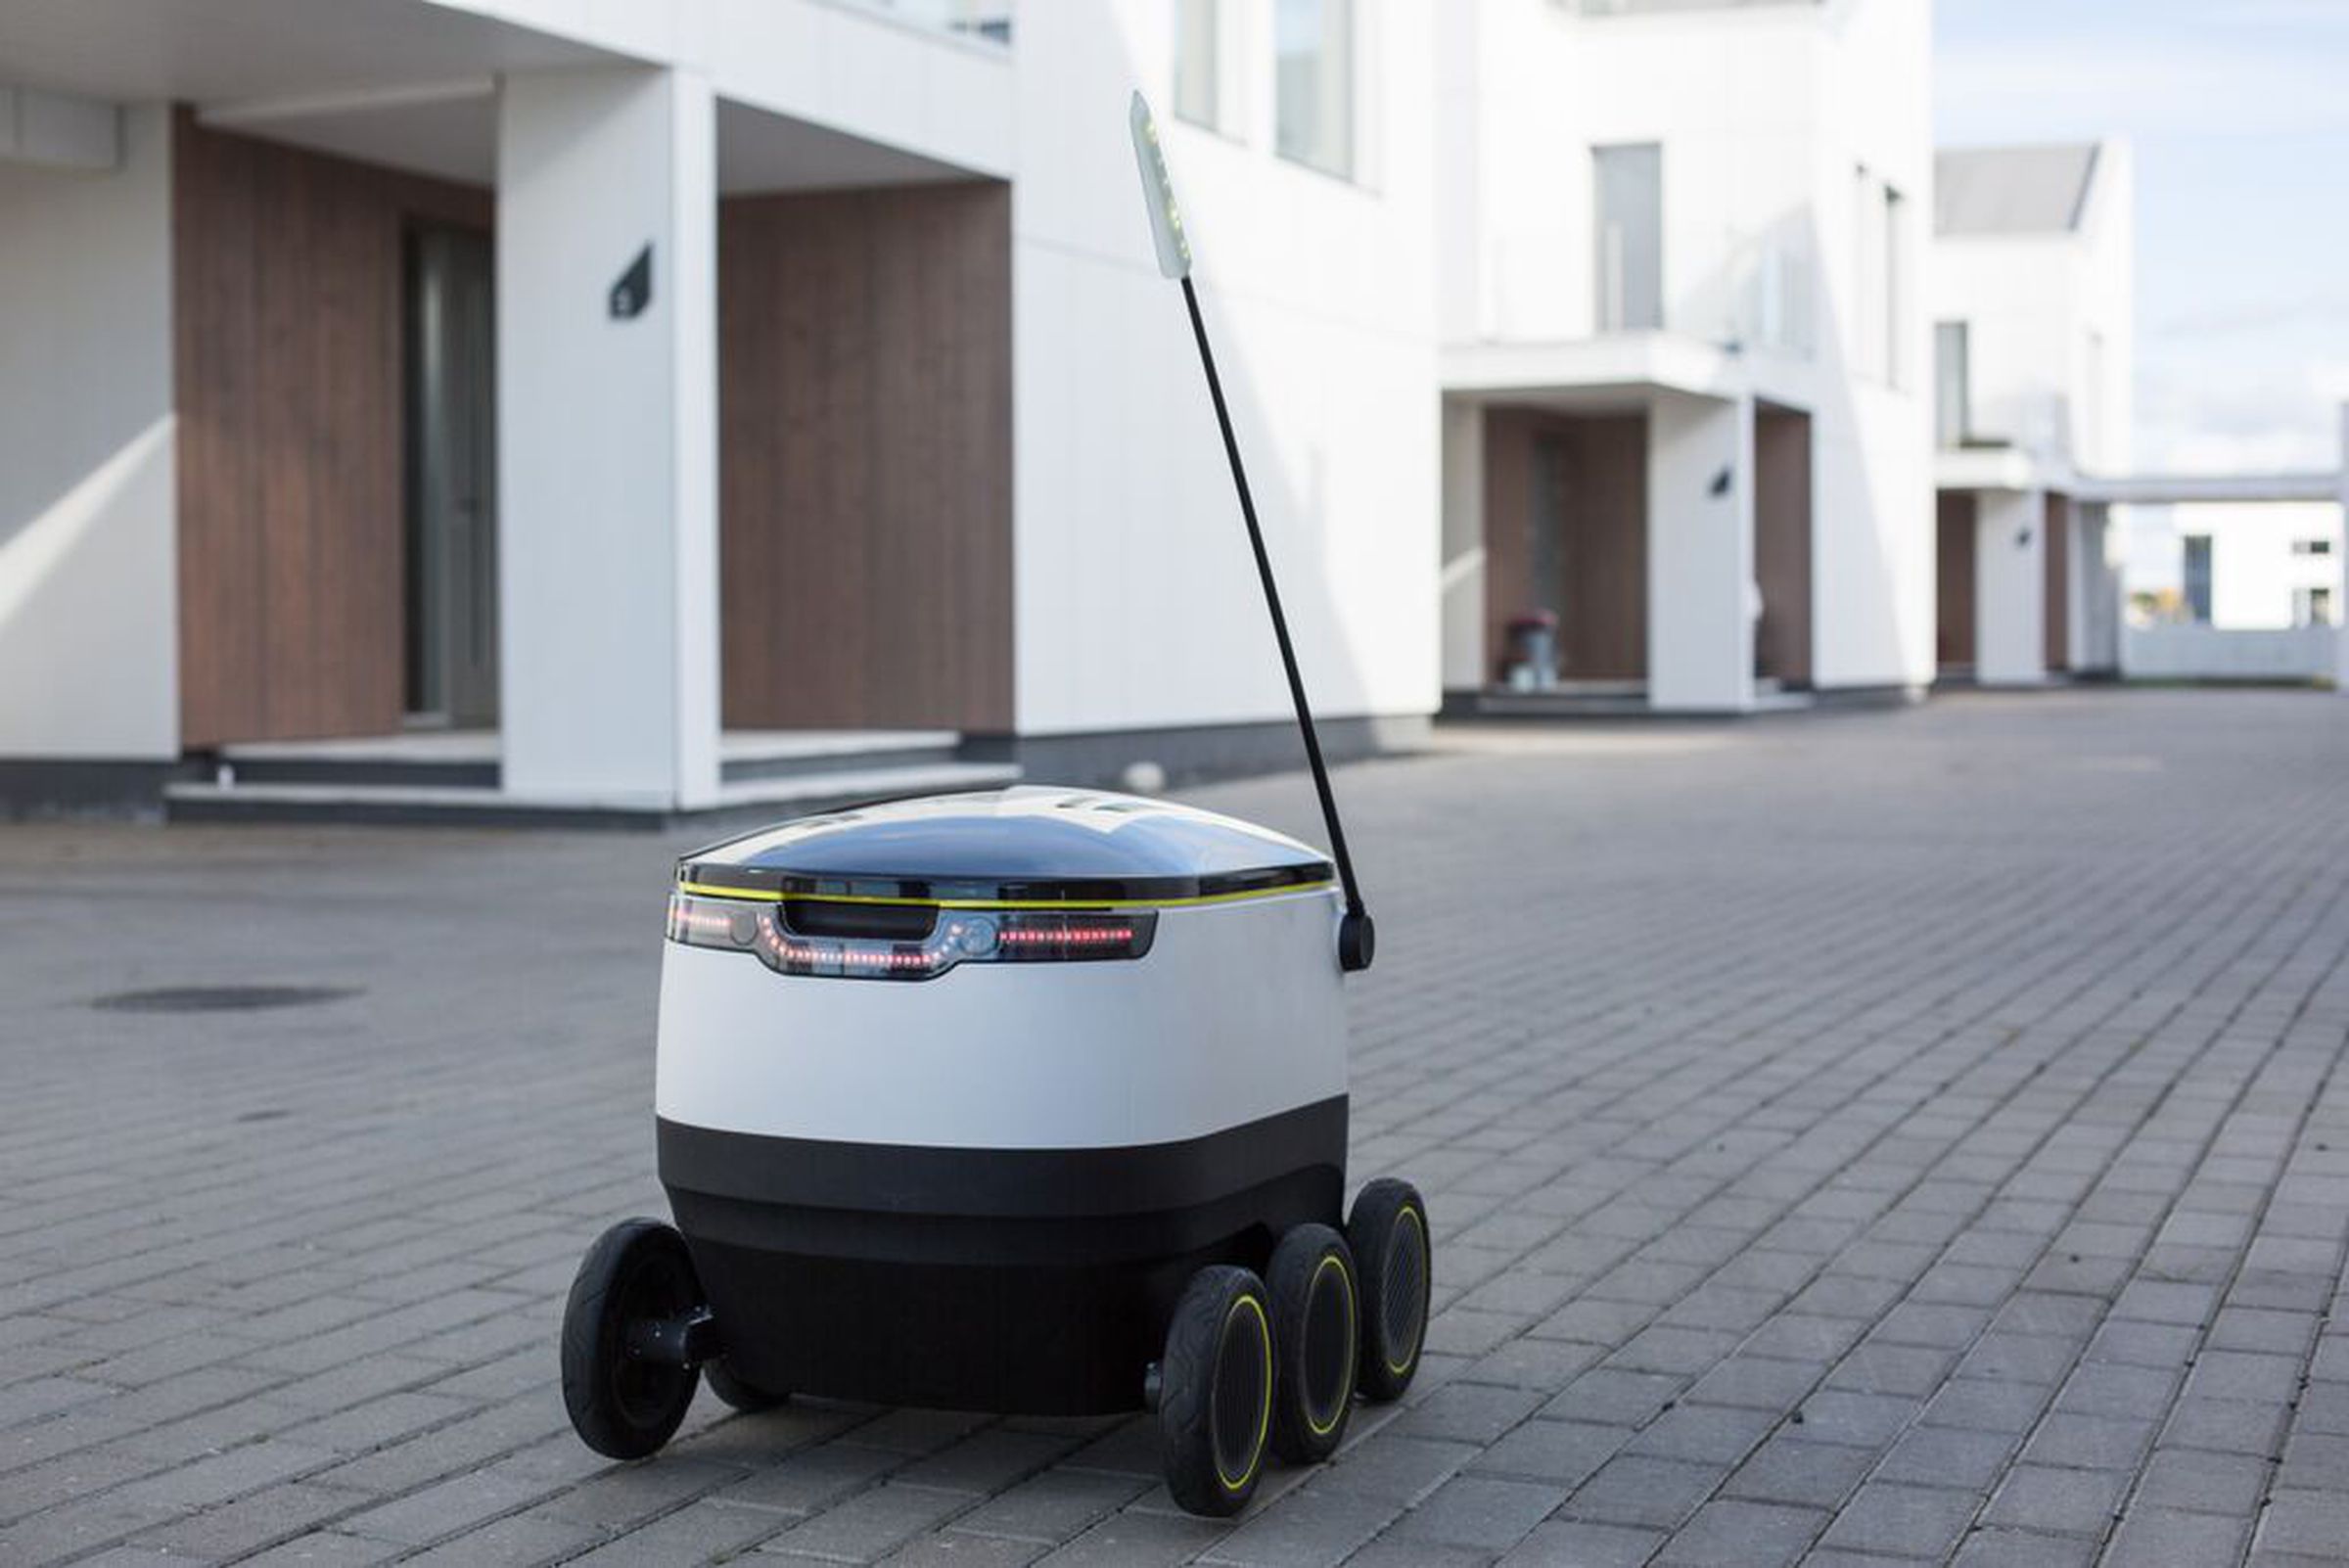 Starship Technologies' six-wheeled delivery robot